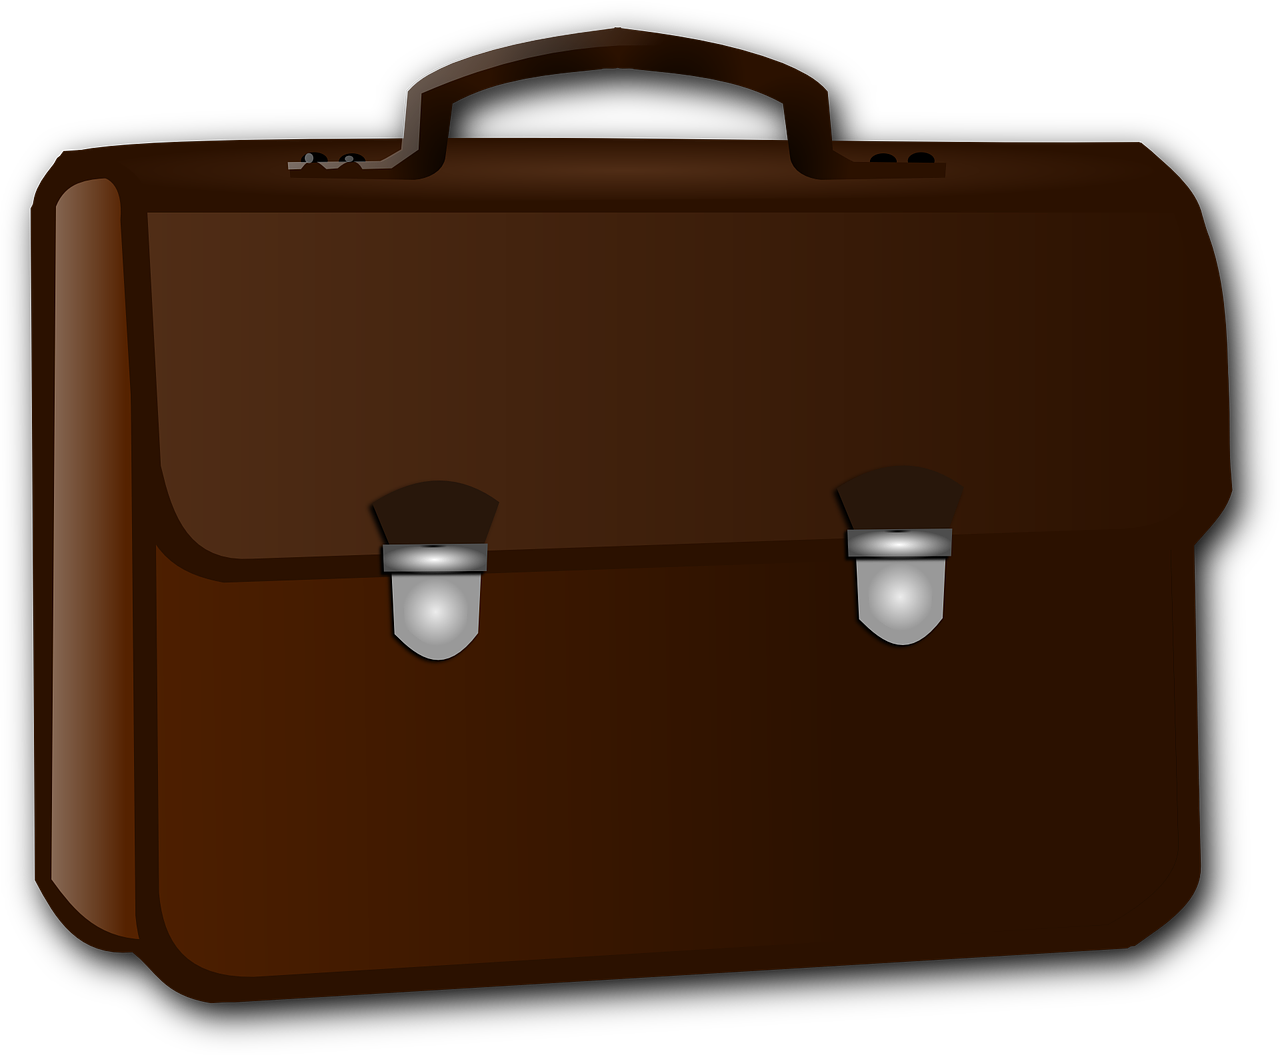 Download free photo of Briefcase,business,brown,free vector graphics